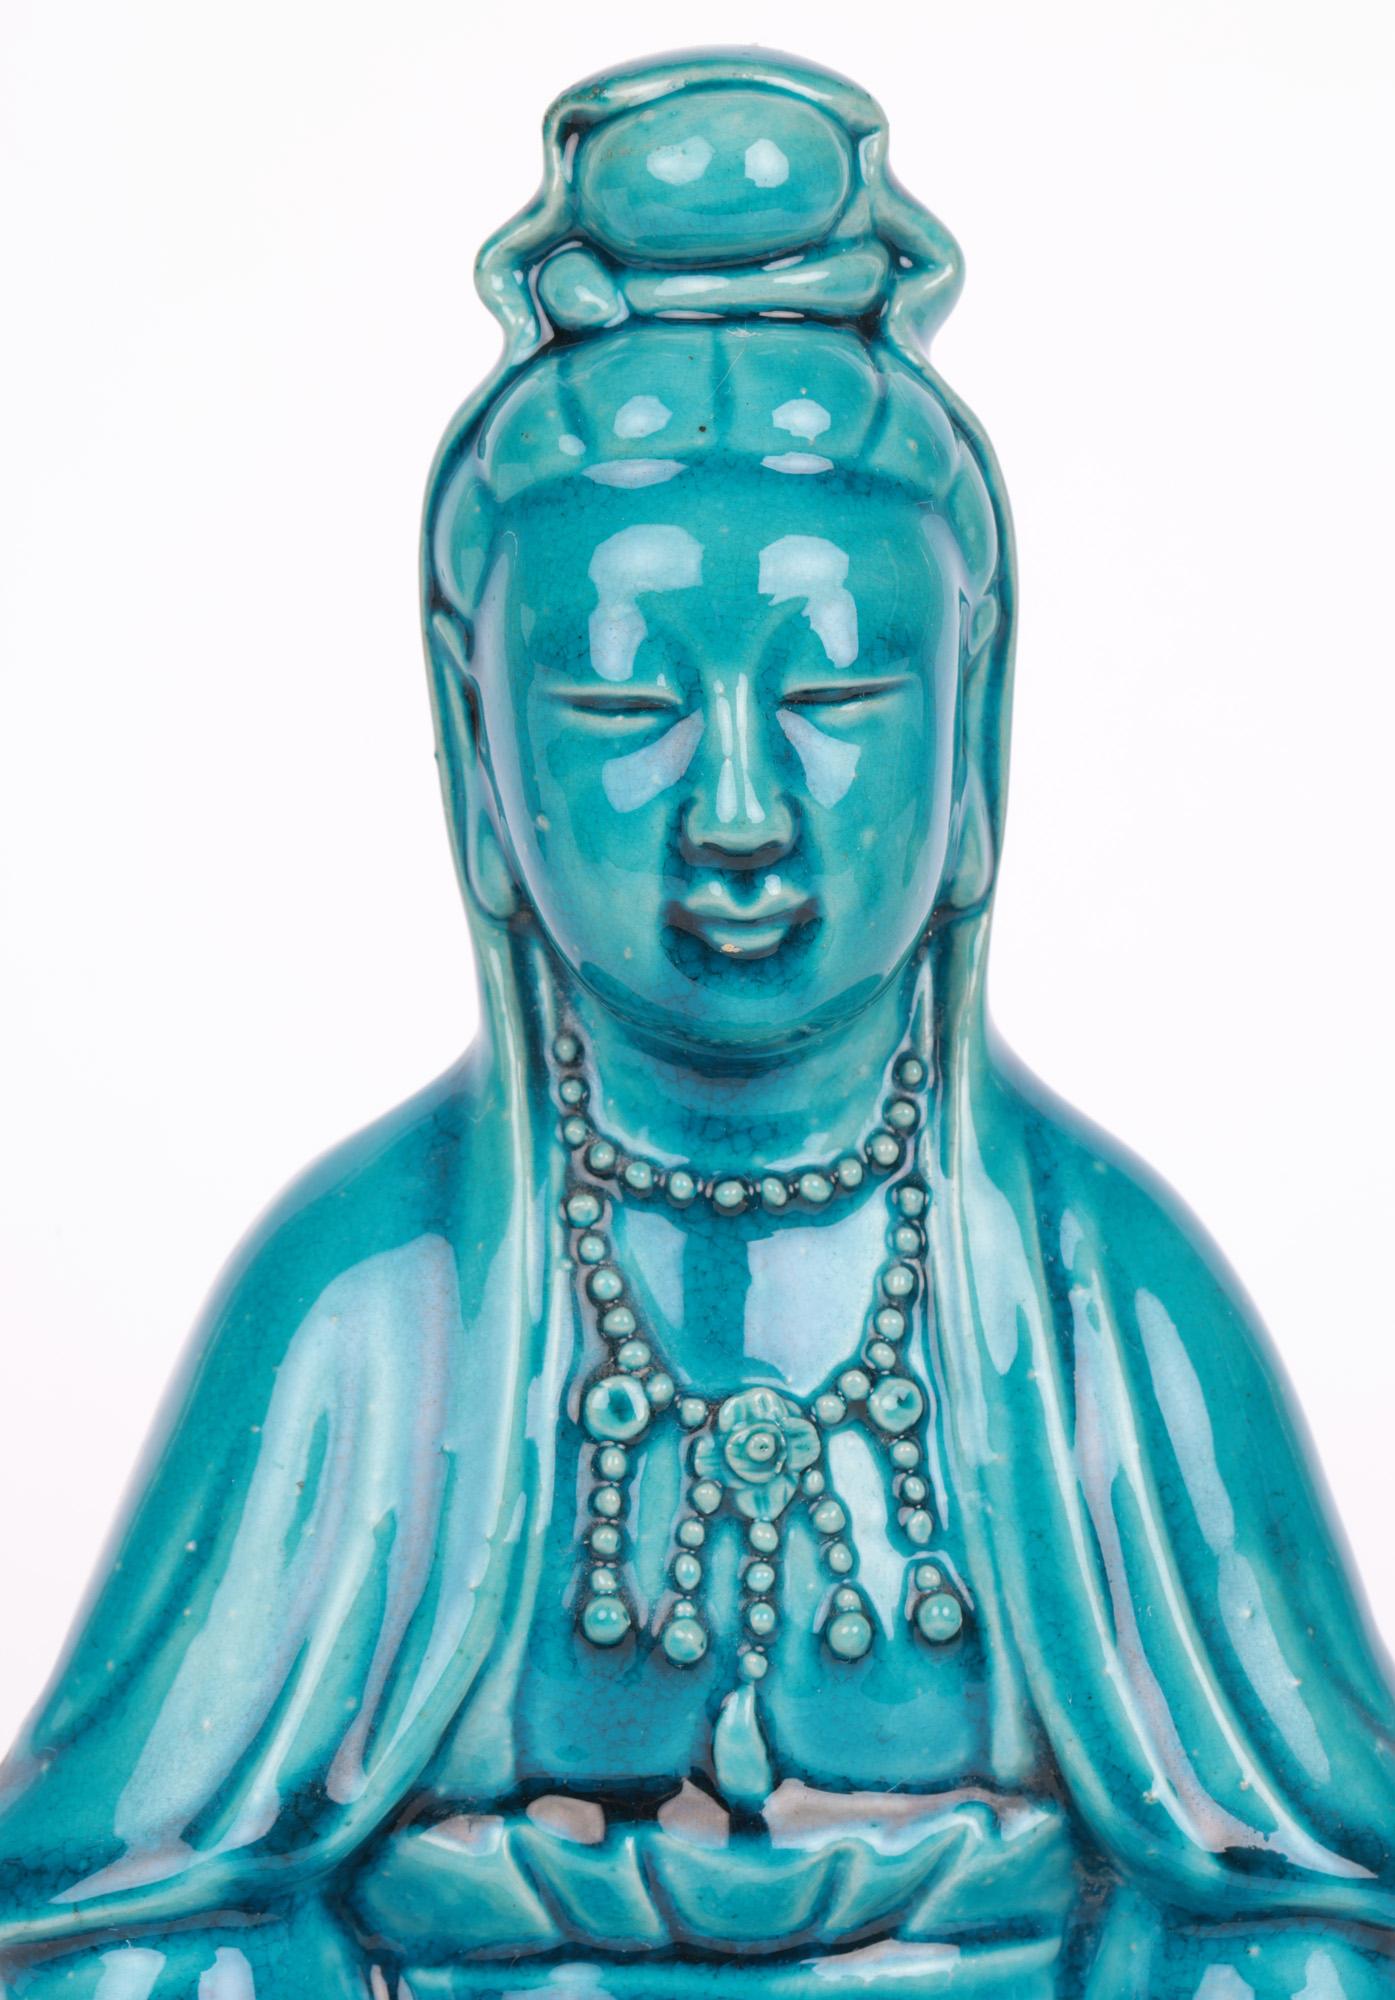 A very fine and attractive Chinese Qing Dynasty turquoise glazed figure of Guanyin dating from the 19th Century or possibly earlier. The hollow biscuit porcelain figurine sits cross legged raised on a lotus flower base and holds a pearl in her lap